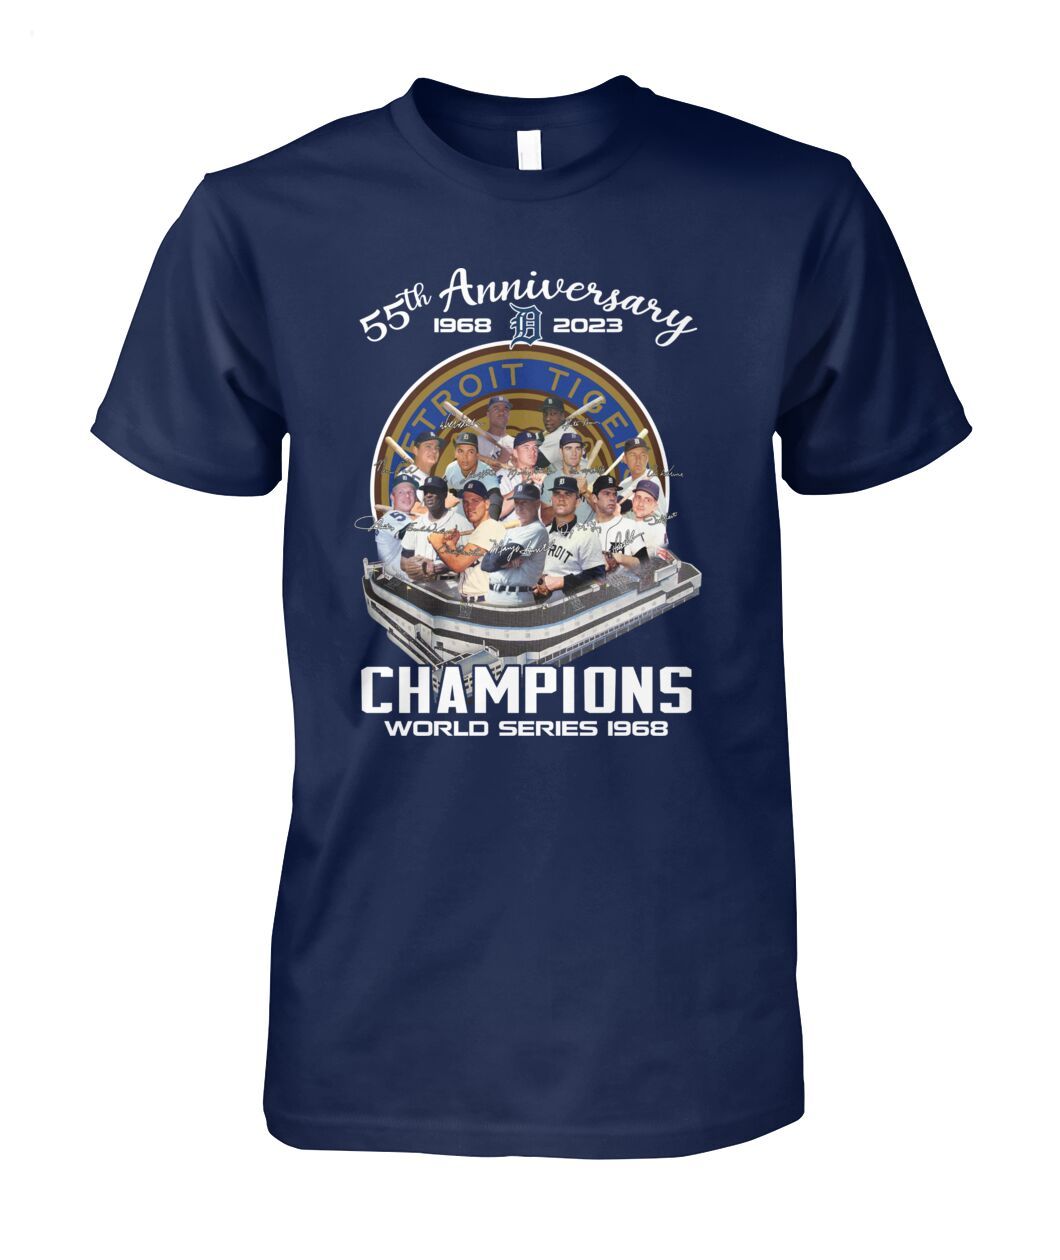 55th Anniversary 1968 - 2023 Detroit Tigers Champions World Series 1968 T- Shirt - Limited Edition - Torunstyle